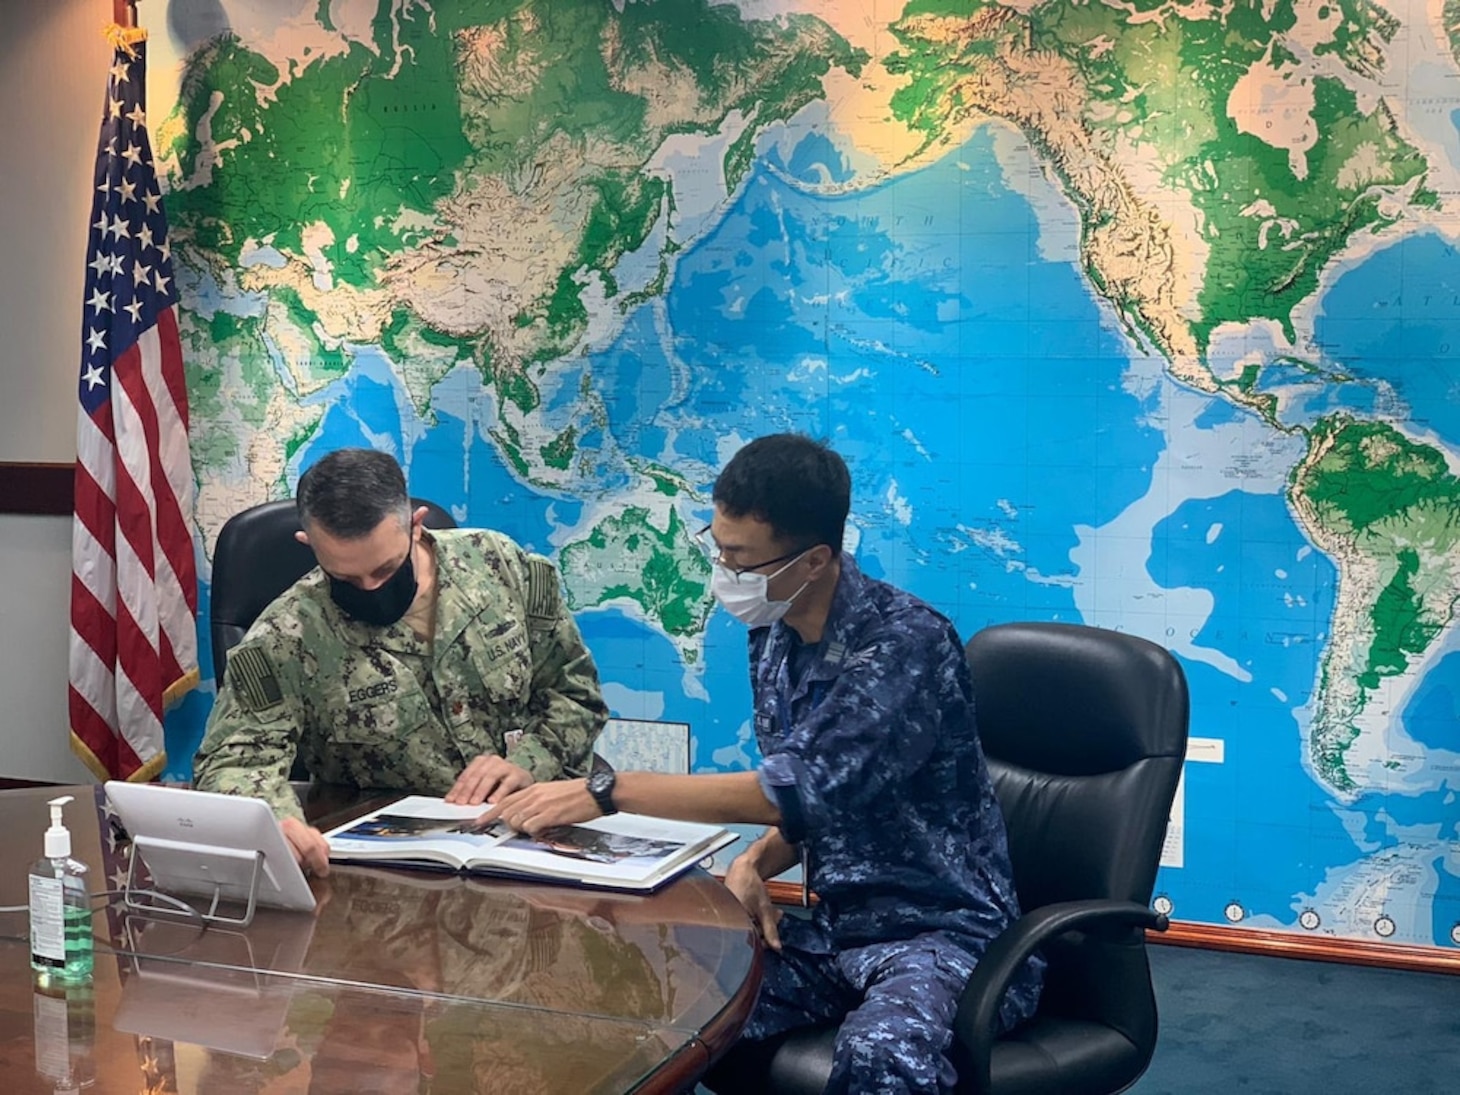 U.S. Navy Lt. Cmdr. Cory Eggers, left, replenishment officer with Commander, Logistics Group Western Pacific (COMLOG WESTPAC) and Japan Maritime Self-Defense Force Lt. Cmdr. Shuzo Homma discuss naval ships in the COMLOG WESTPAC conference room. (U.S. Navy photo by Lt. Teddy Haghverdi)